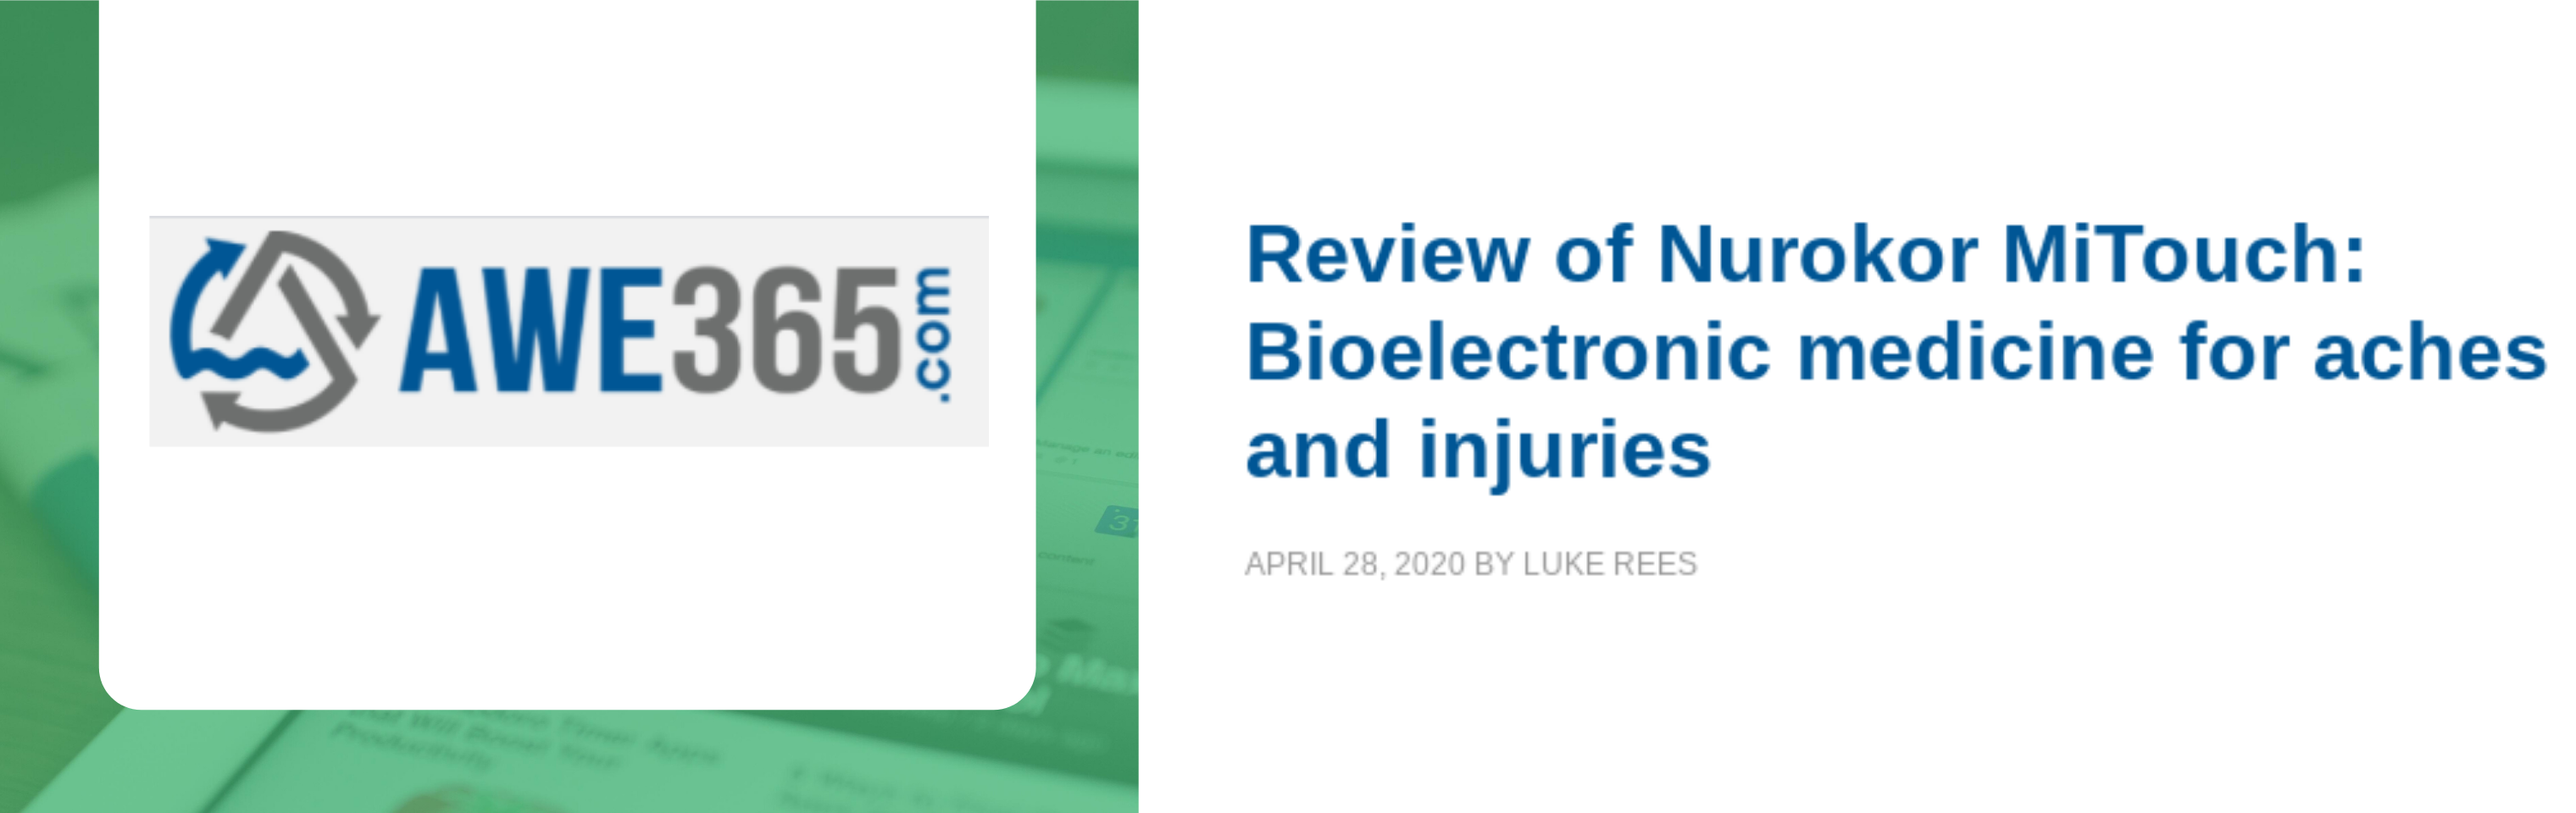 Awe365 review NuroKor mitouch, 'Bioelectronic medicine for aches and injuries'